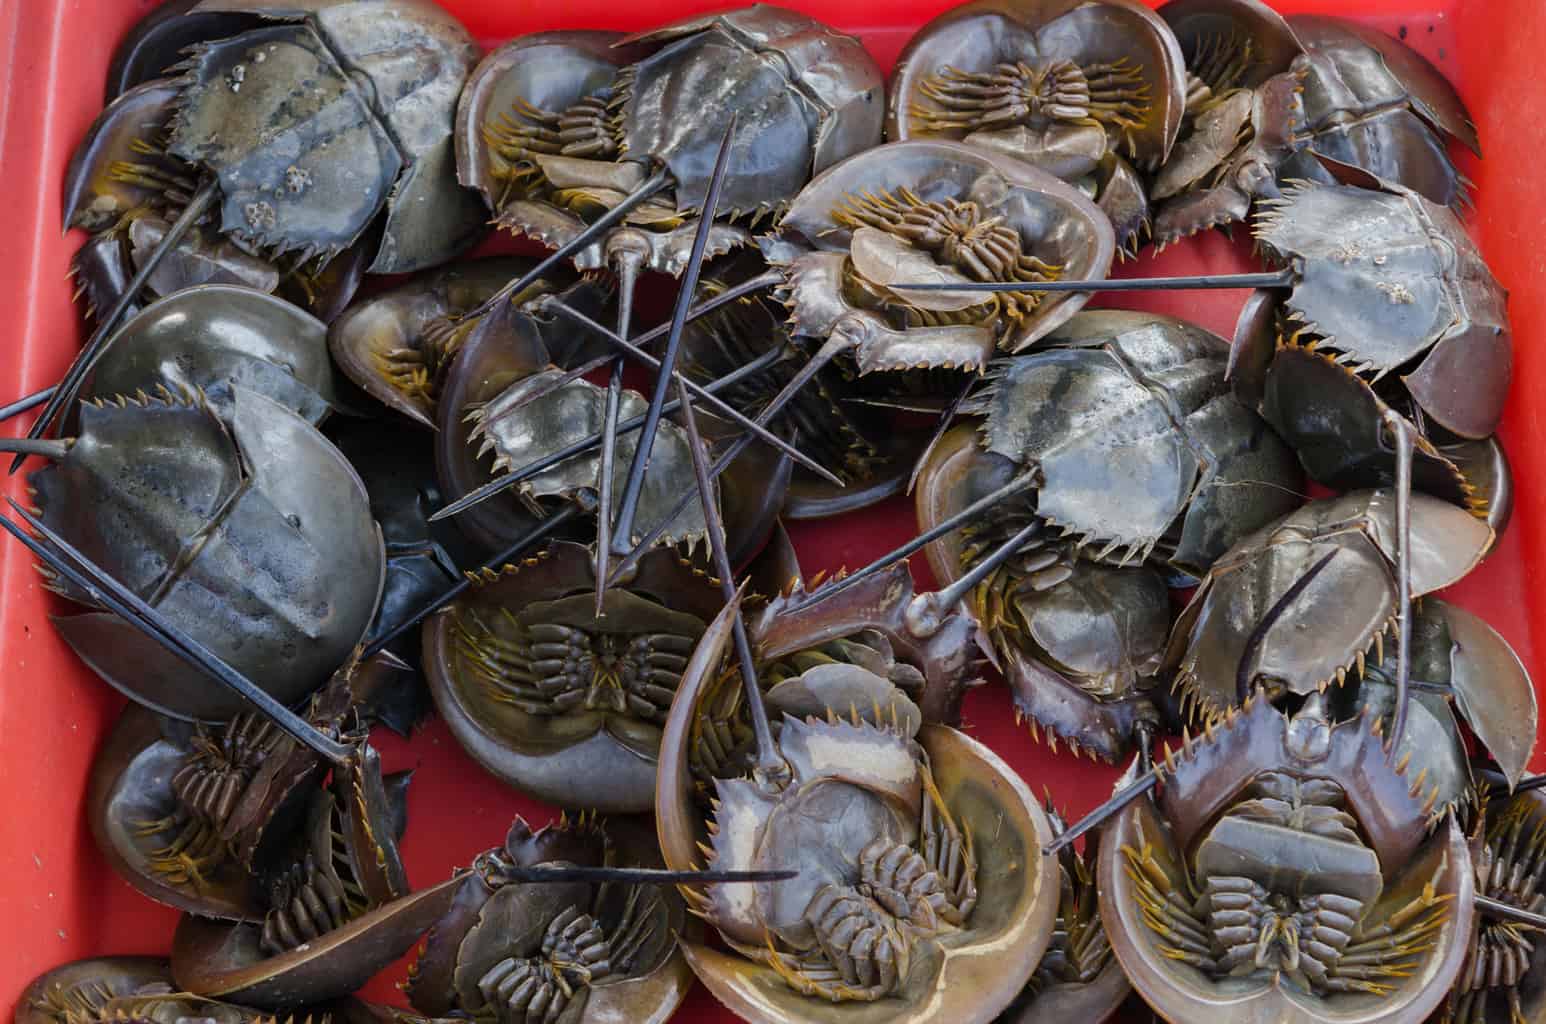 multiple horseshoe crabs in a red container. can you eat horseshoe crab?